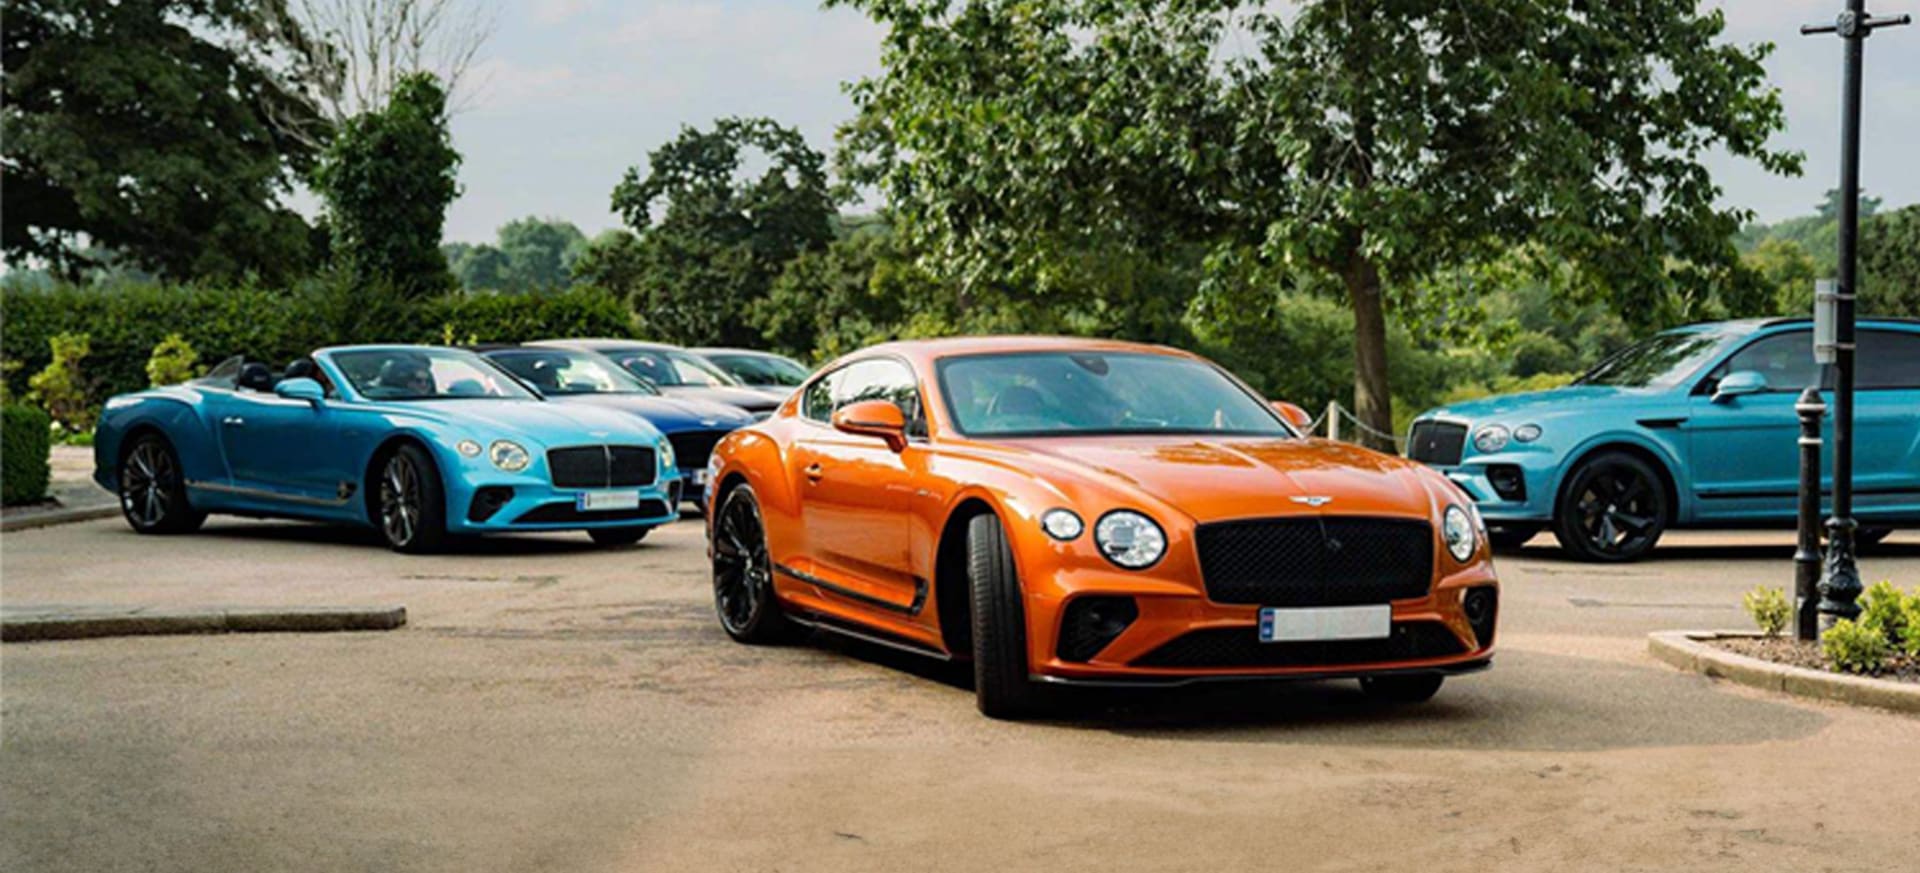 Discover the Certified by Bentley line-up